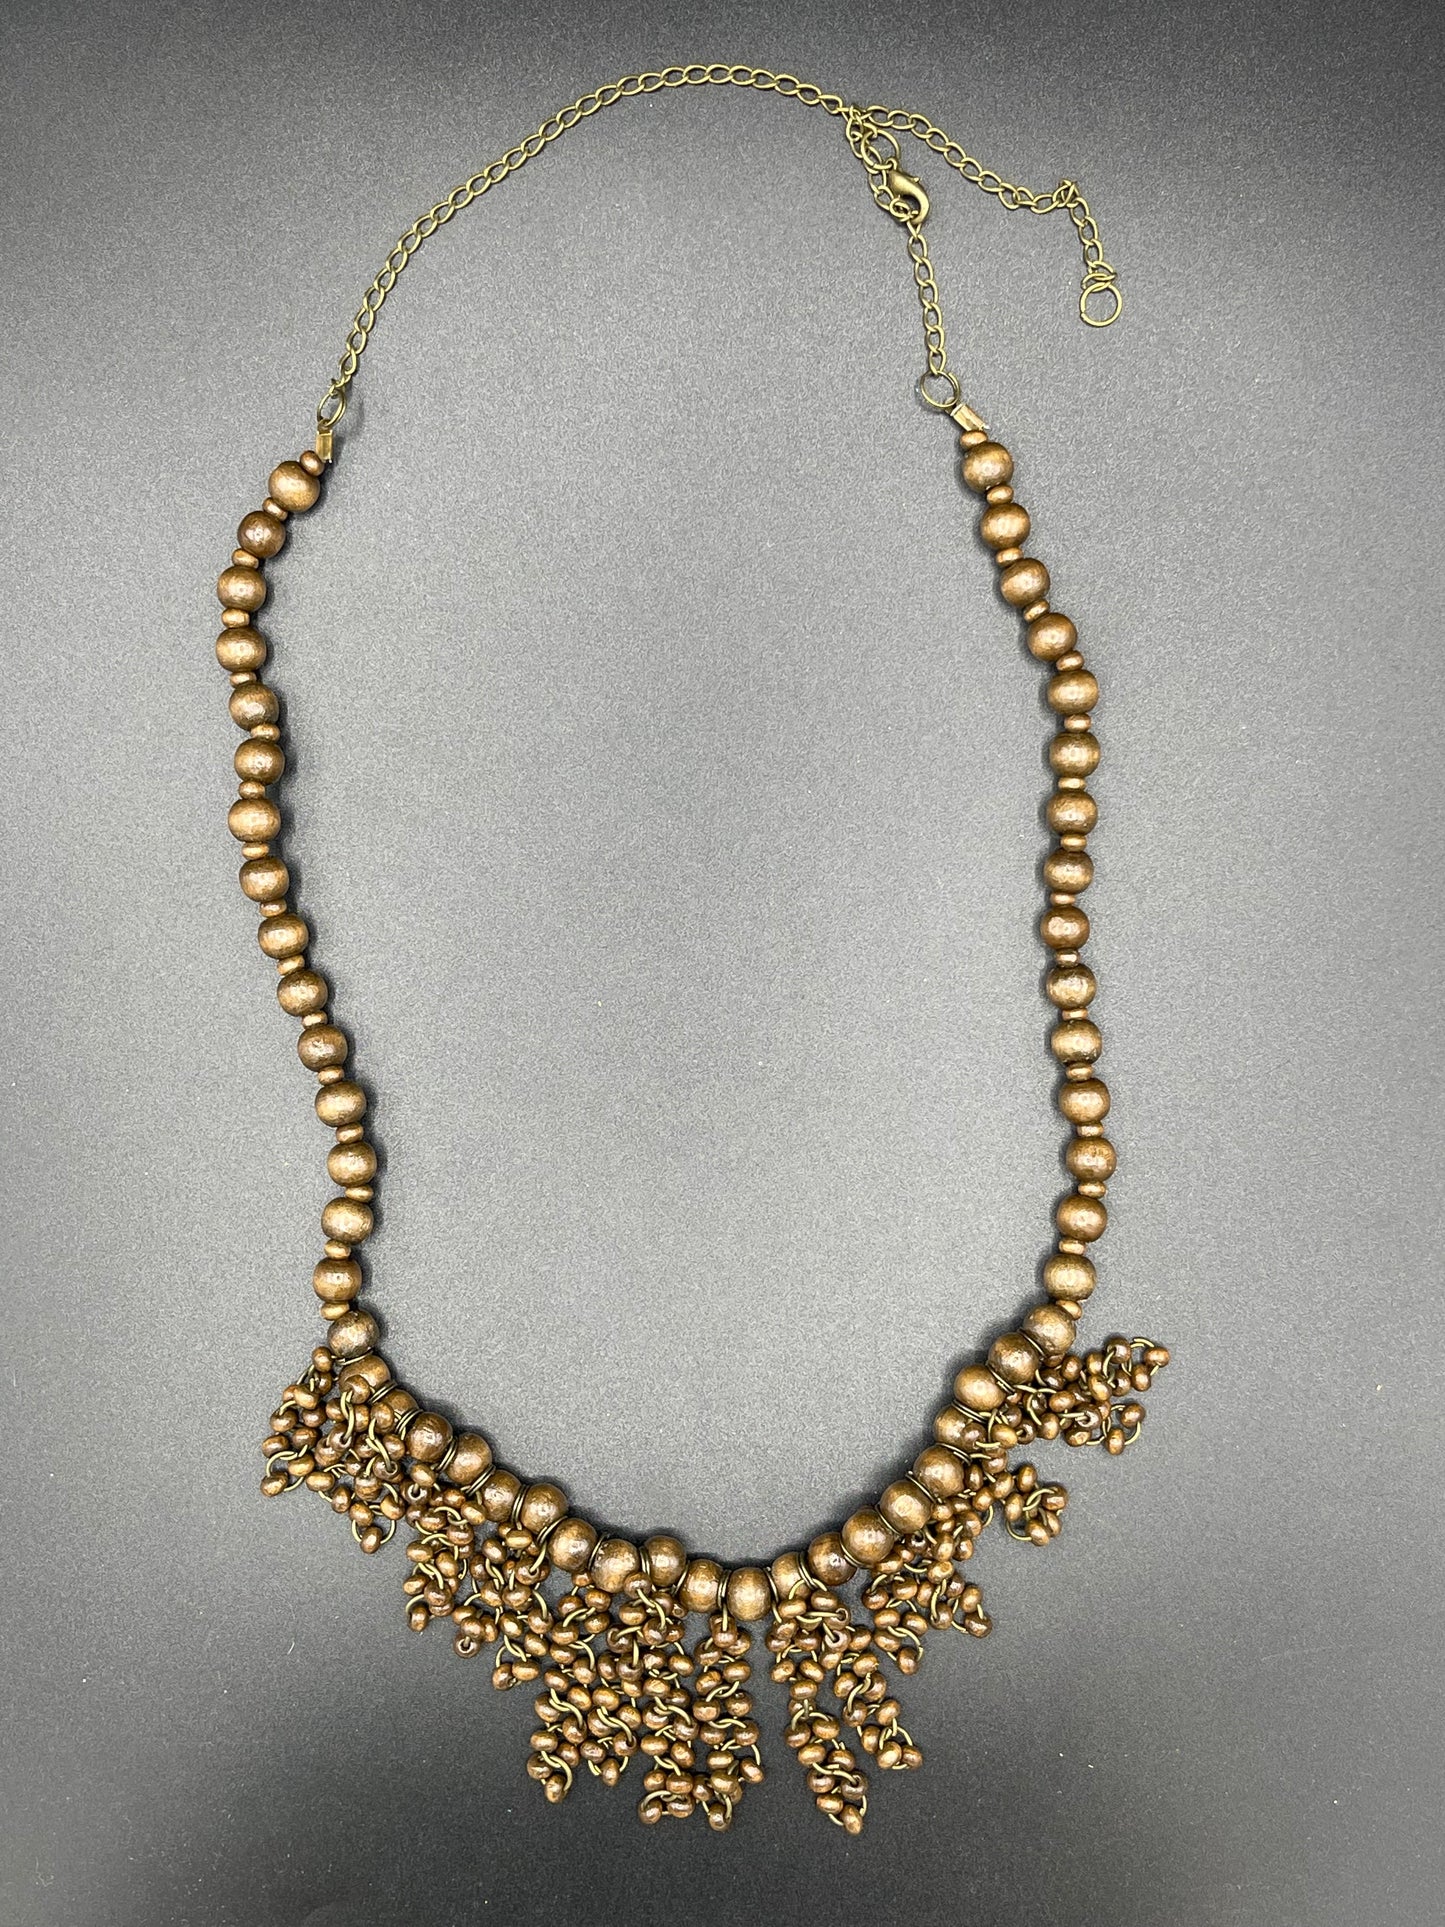 The "Cascading Beaded Necklace"